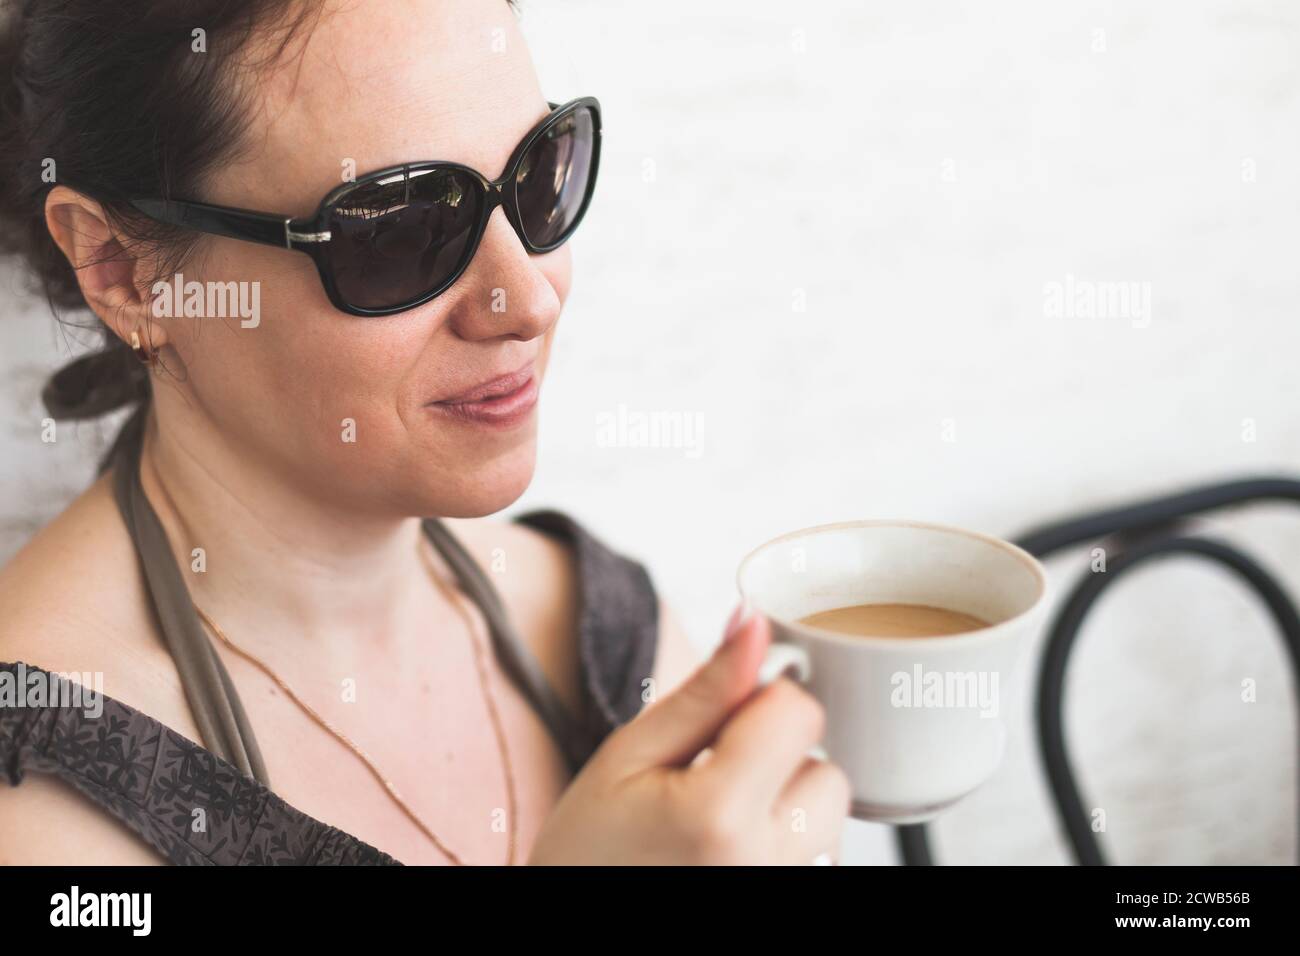 Young European woman in dark sunglasses drinks coffee with milk, outdoor portrait photo Stock Photo